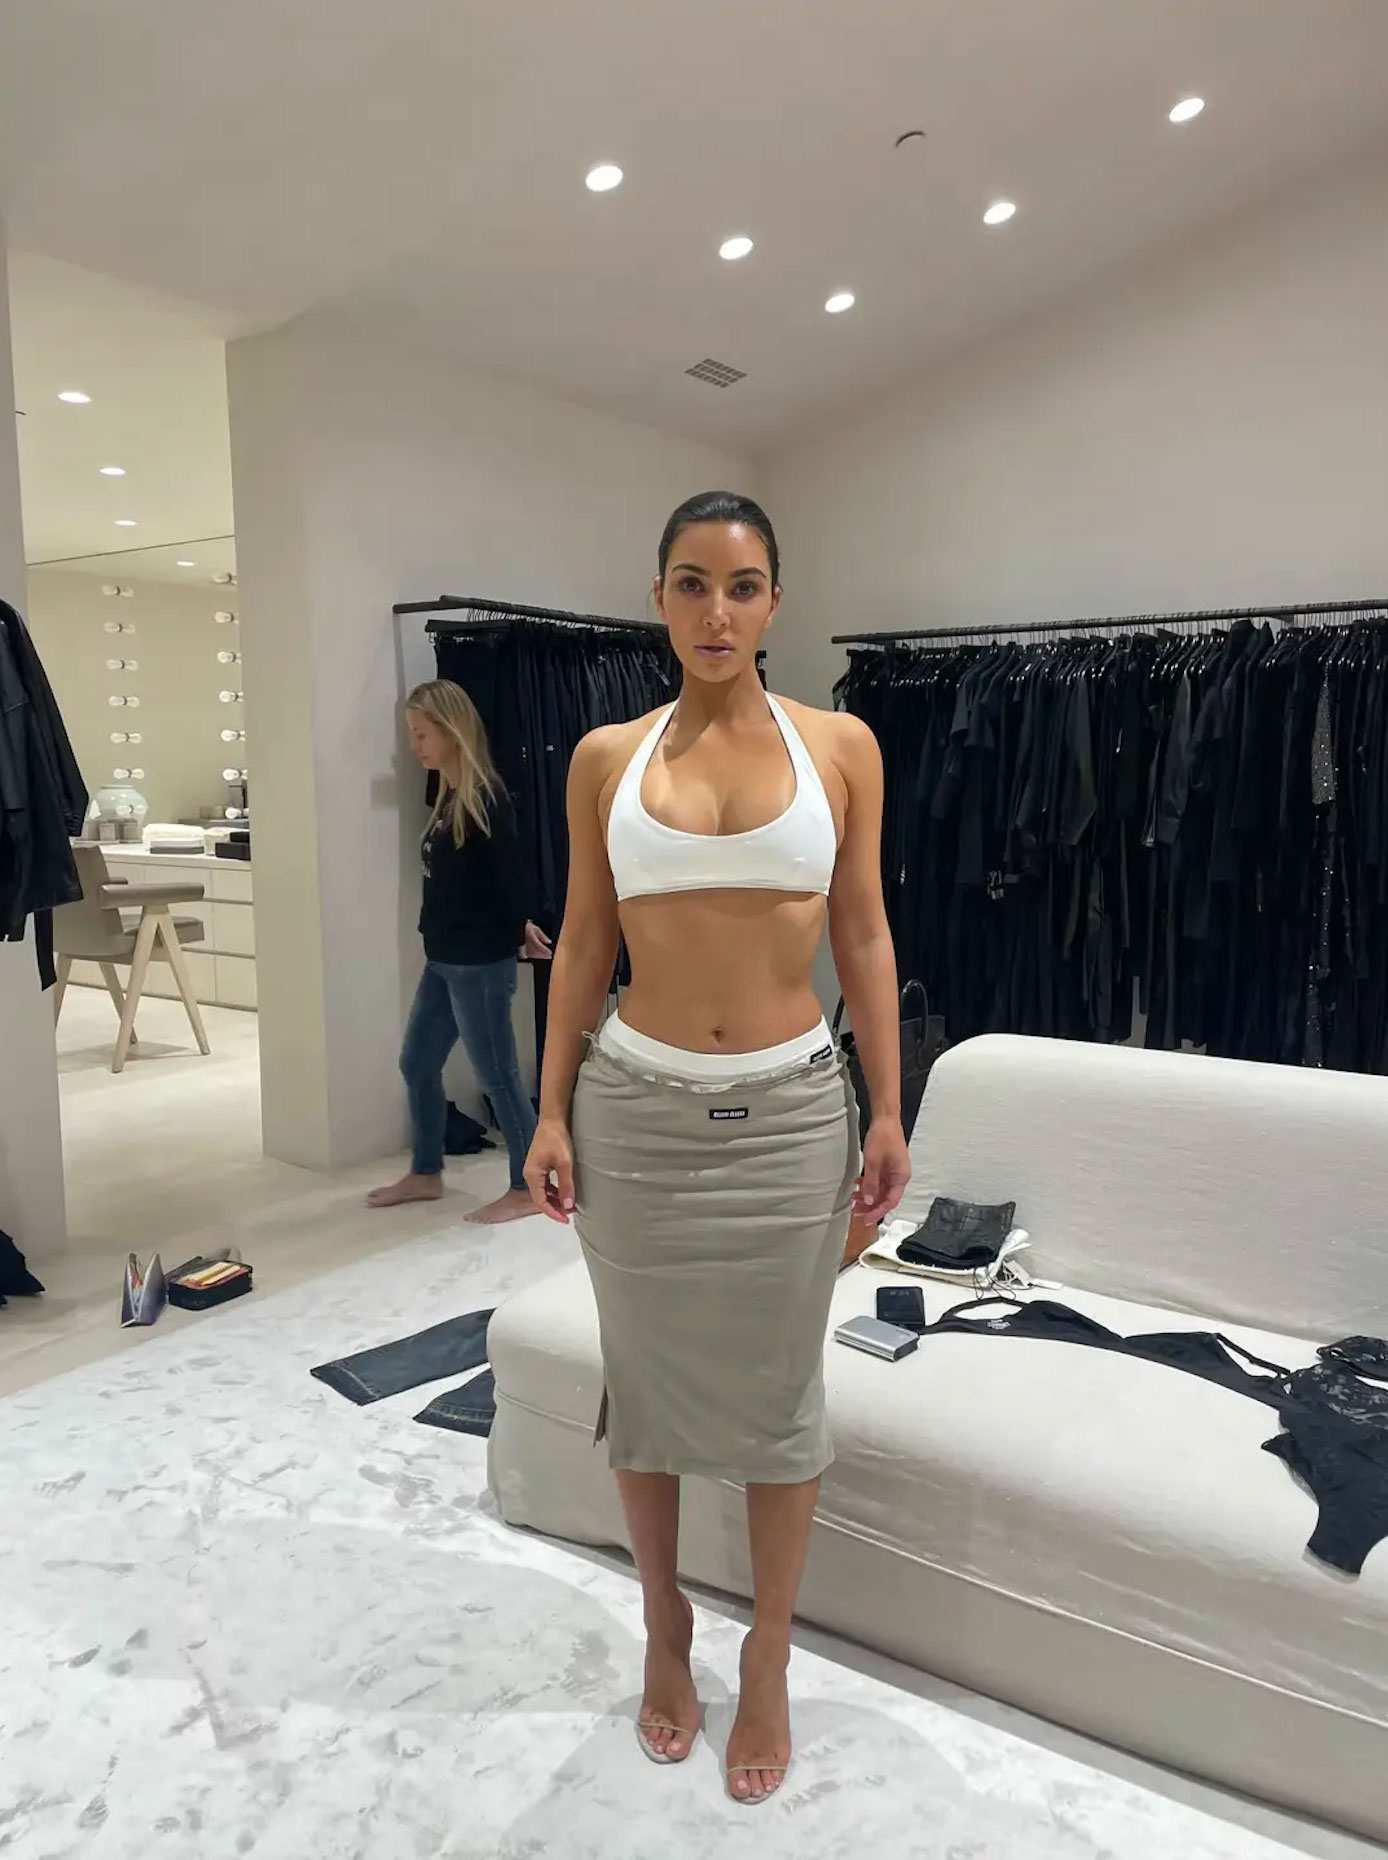 North shared a little too much of her mom, including various states of undress